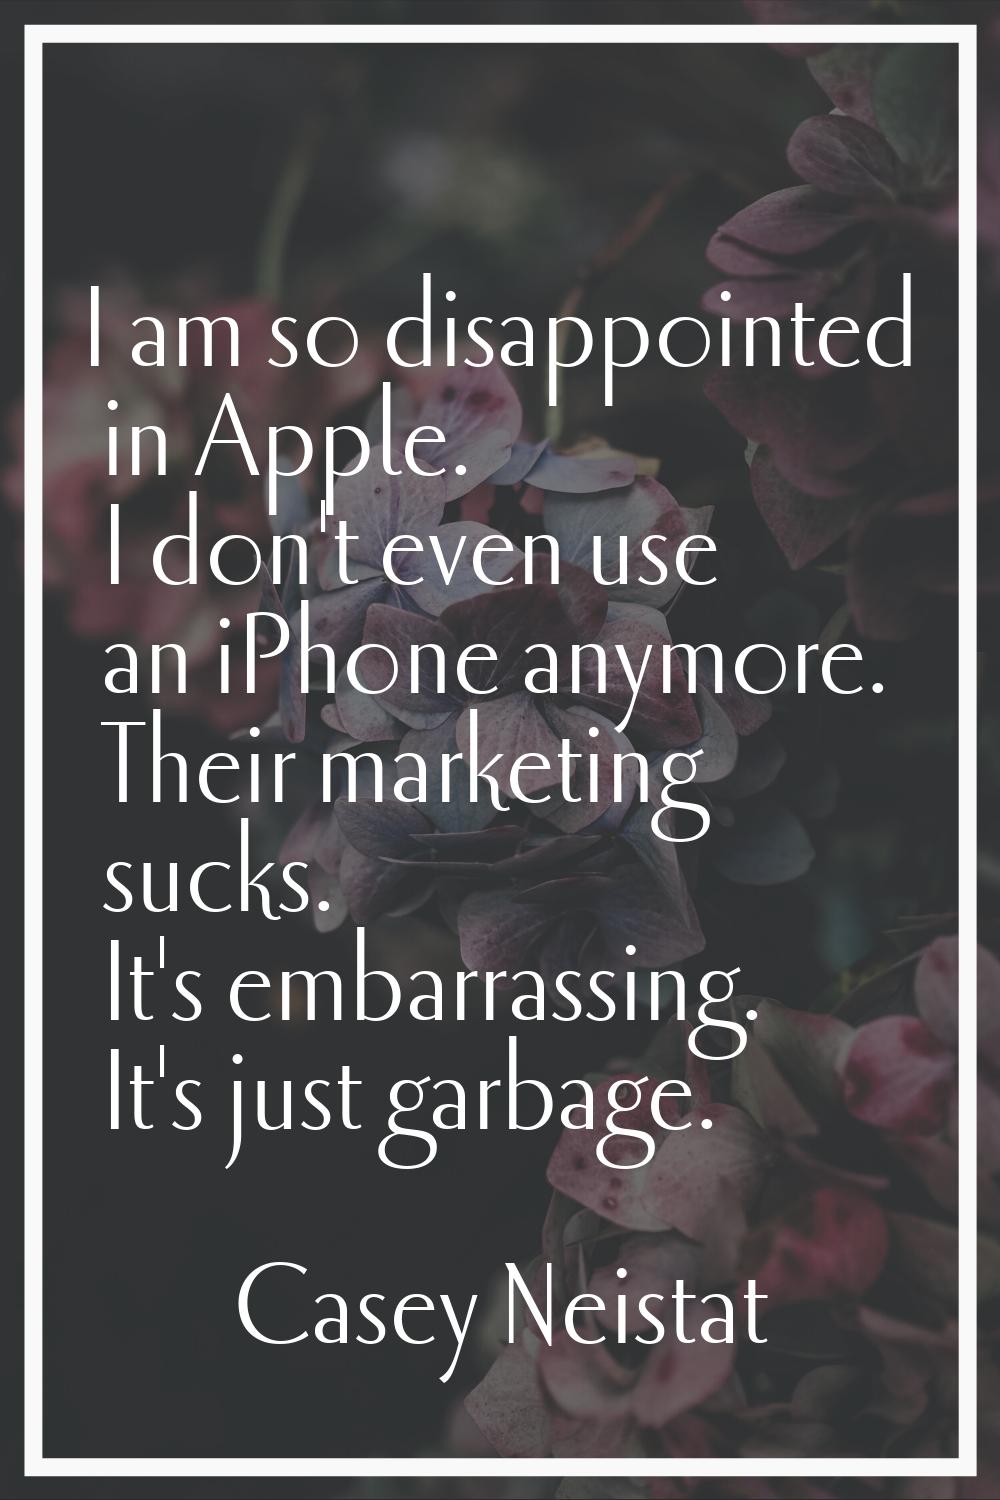 I am so disappointed in Apple. I don't even use an iPhone anymore. Their marketing sucks. It's emba